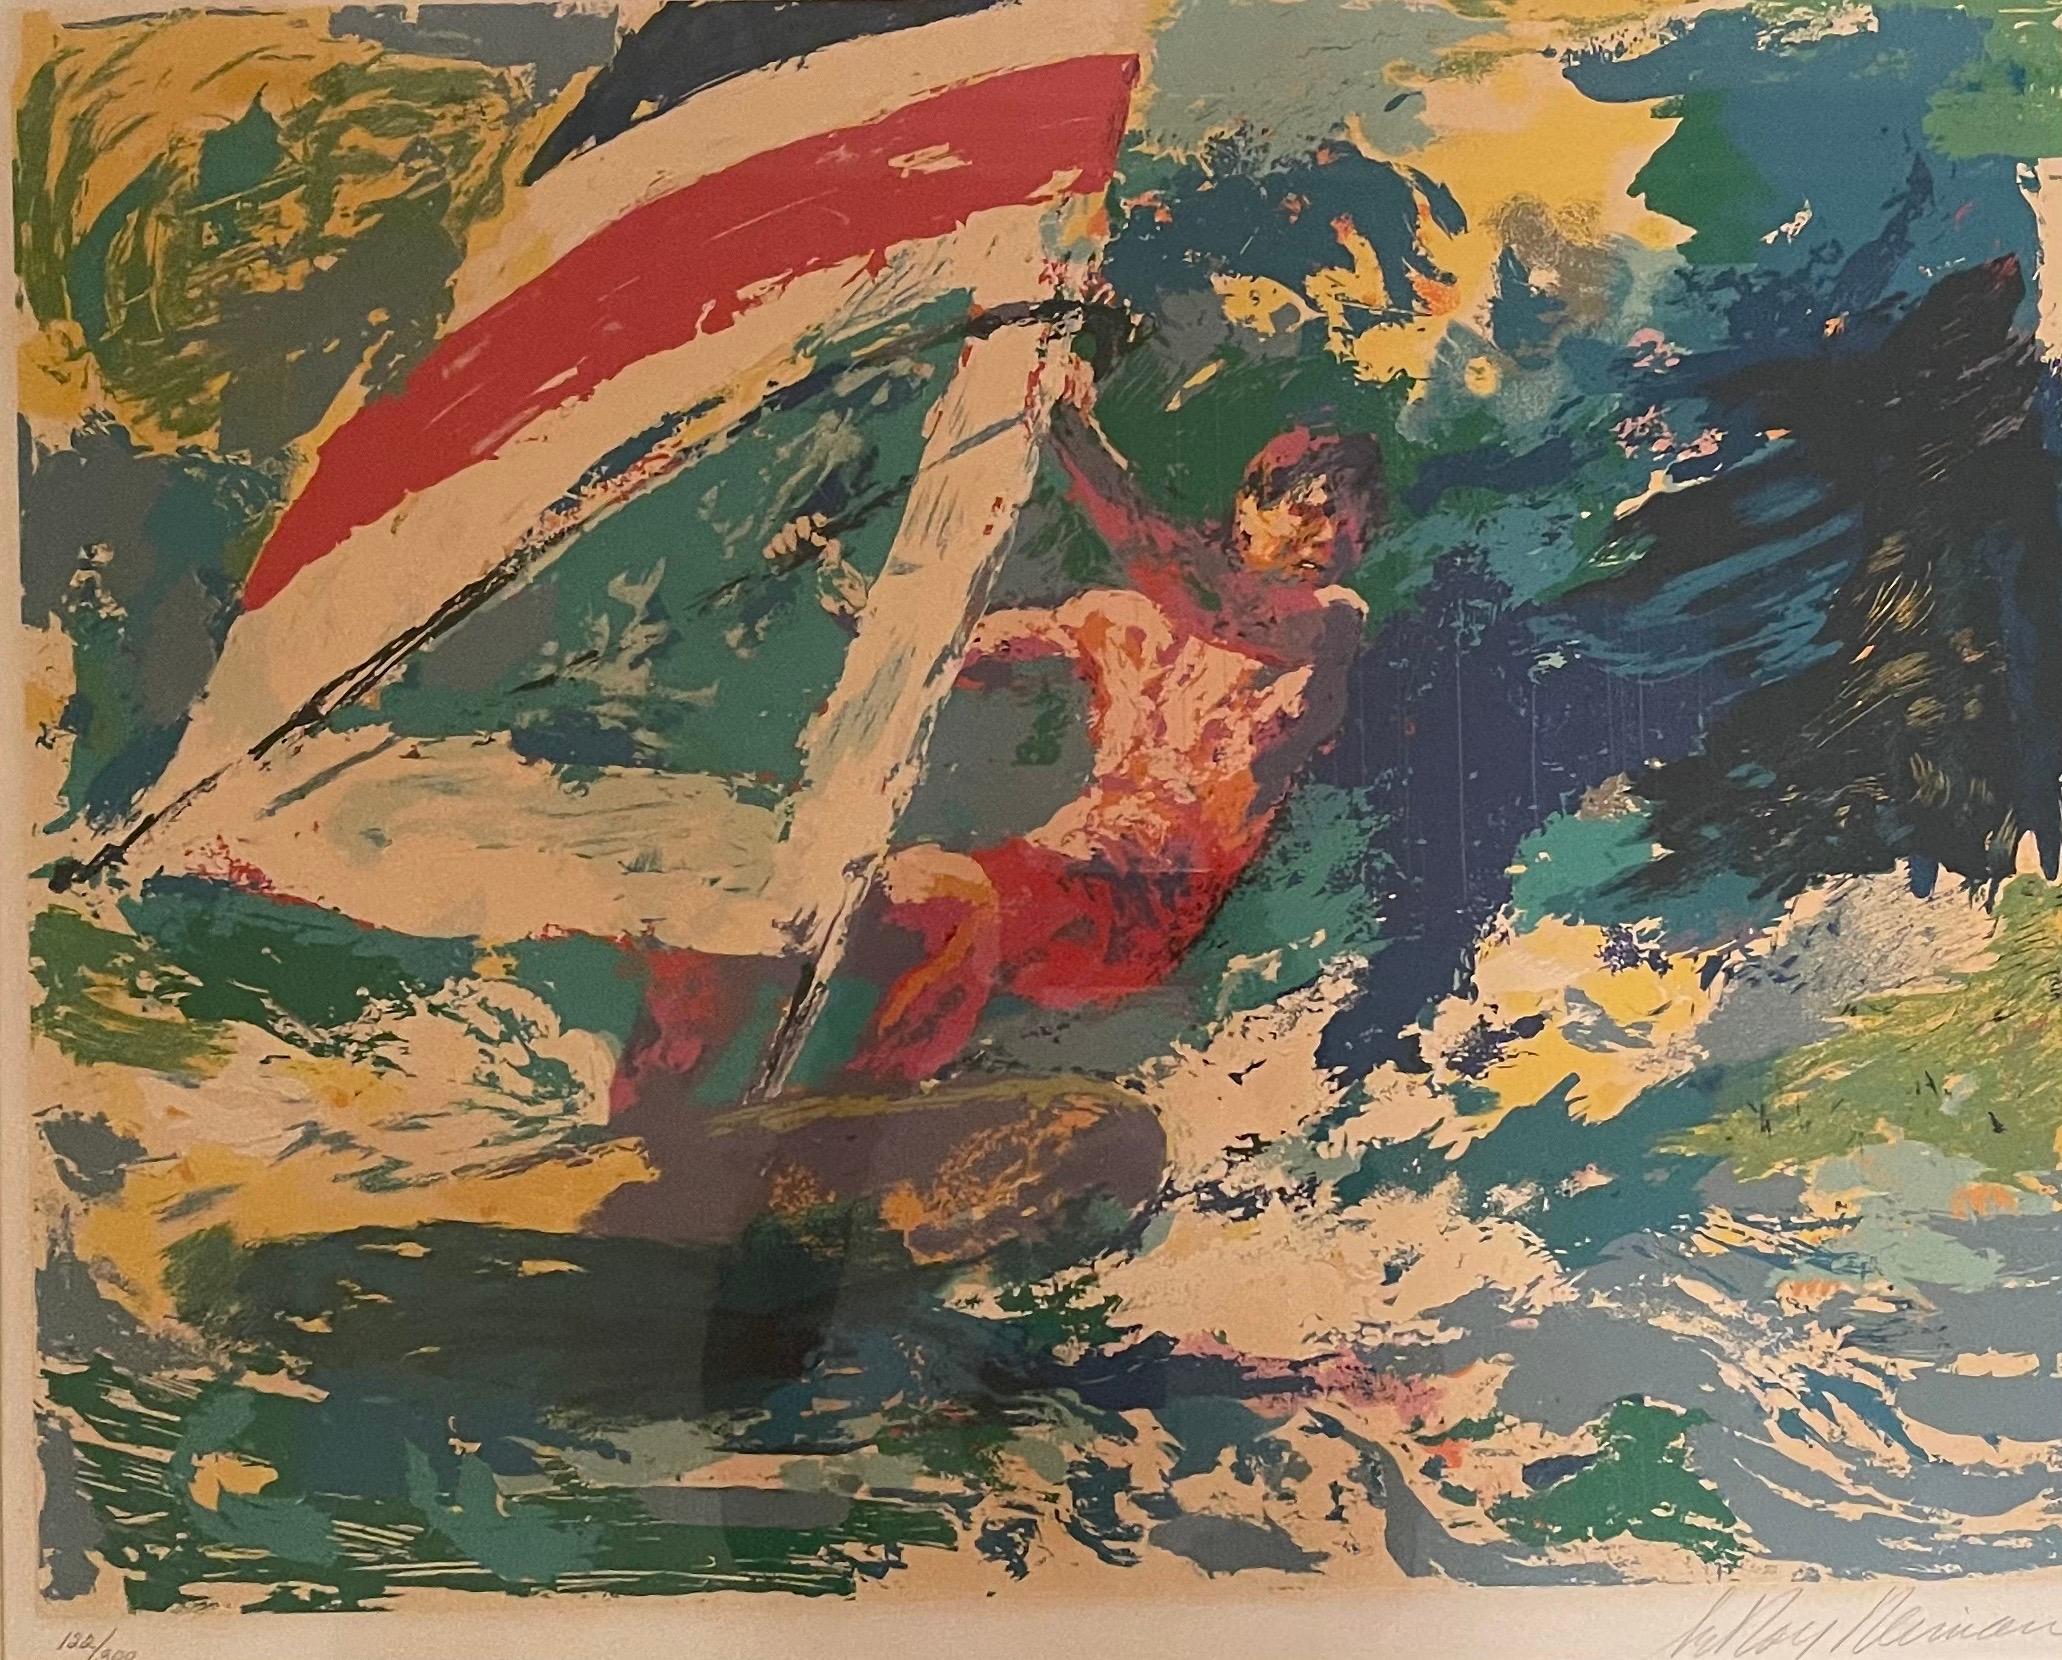 leroy neiman signed prints for sale